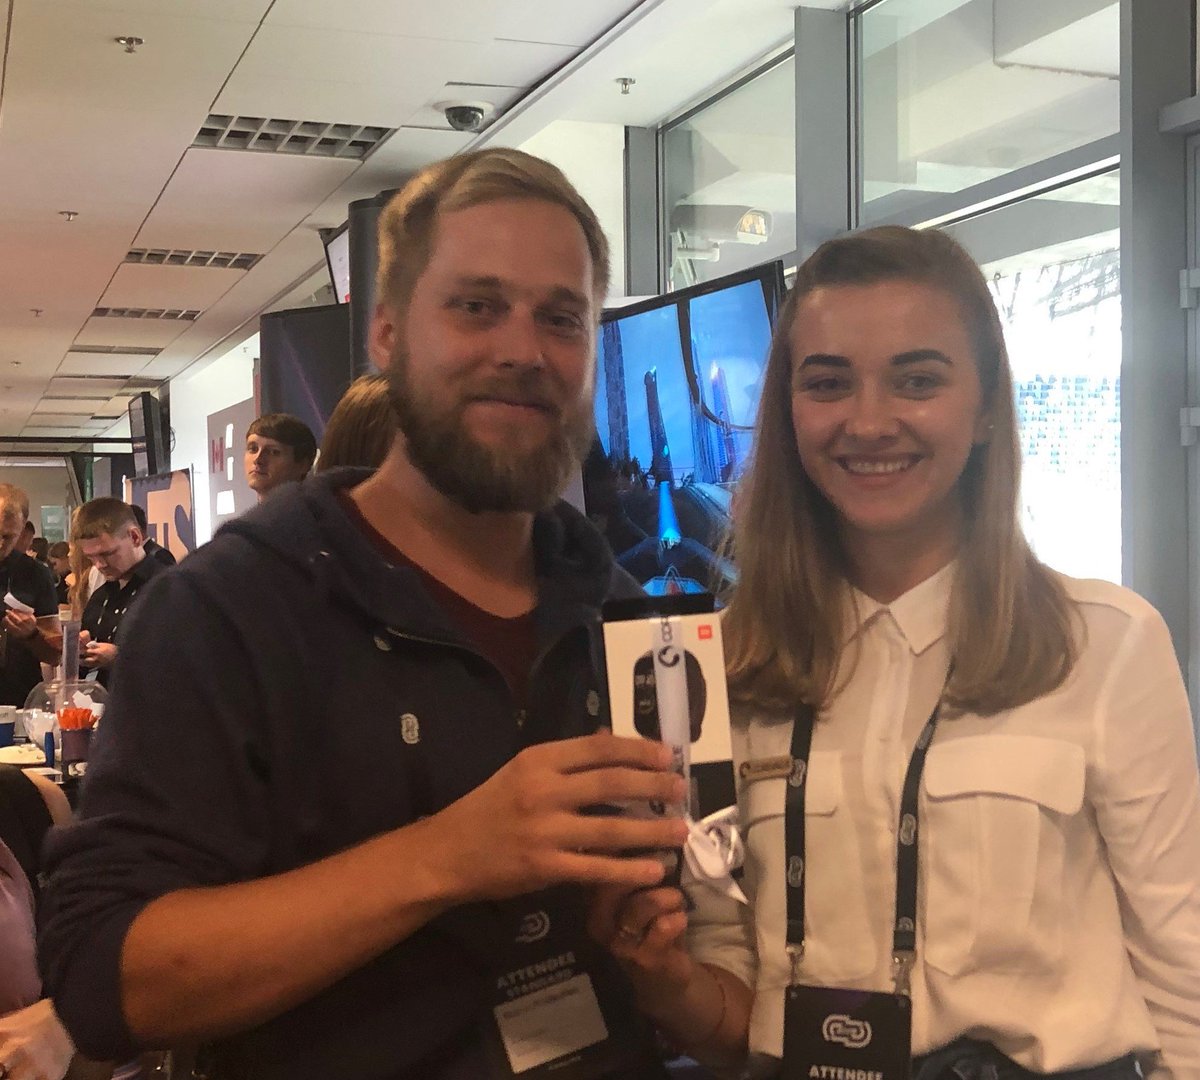 The winner takes it all and we get even two of them here at @LvivITArena! Congrats, guys 🥳🏆🎉 Our robot cleaner and fitness tracker are in safe hands now.
#CoreValue #techevents #technology #itarena2019 #gift #win #robotcleaner #fitnesstracker